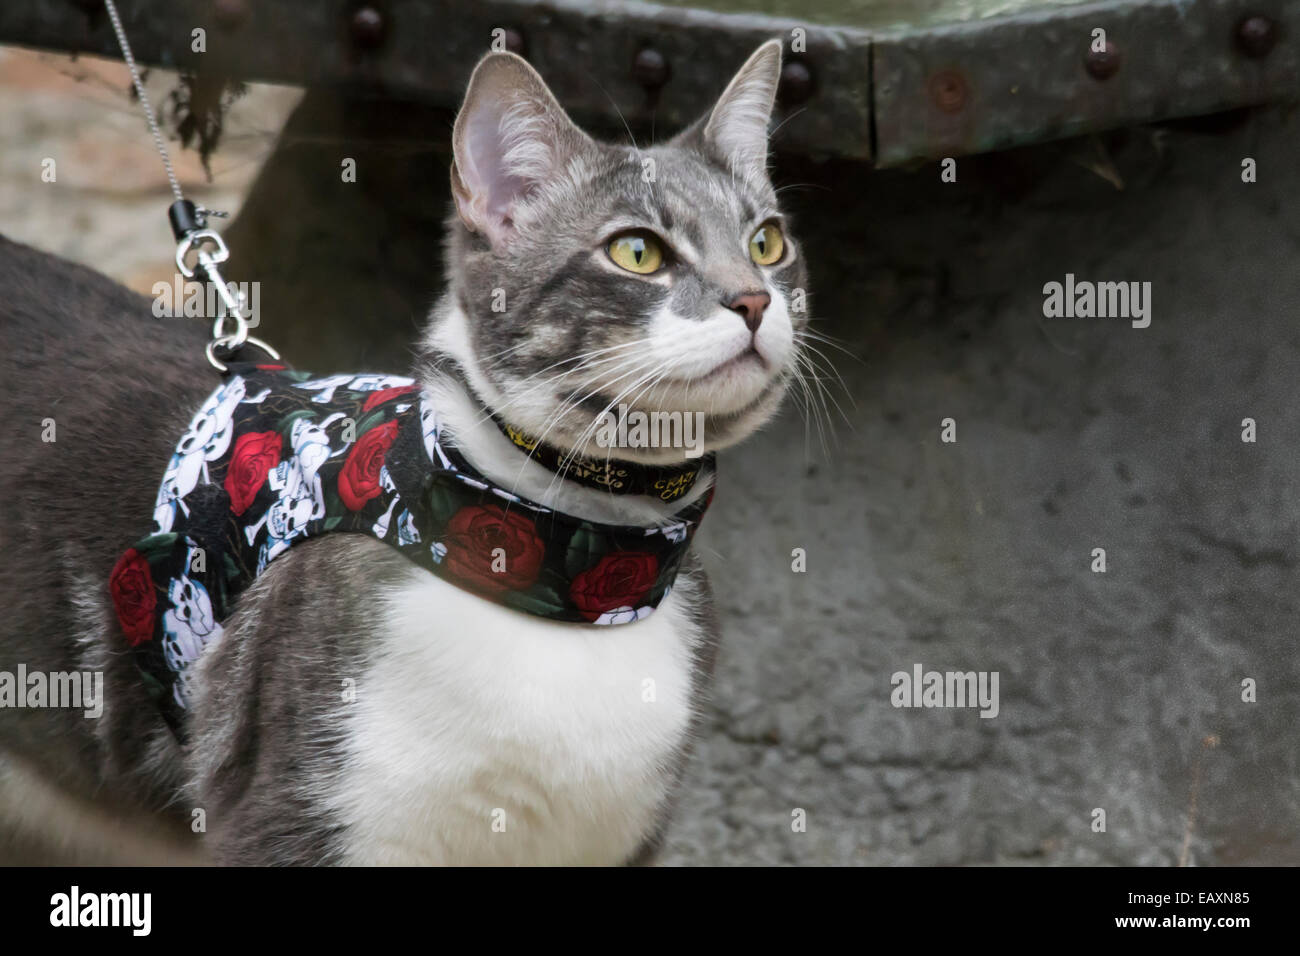 Domestic Short hair cat taking a on leash walk wearing a vest harness Stock Photo